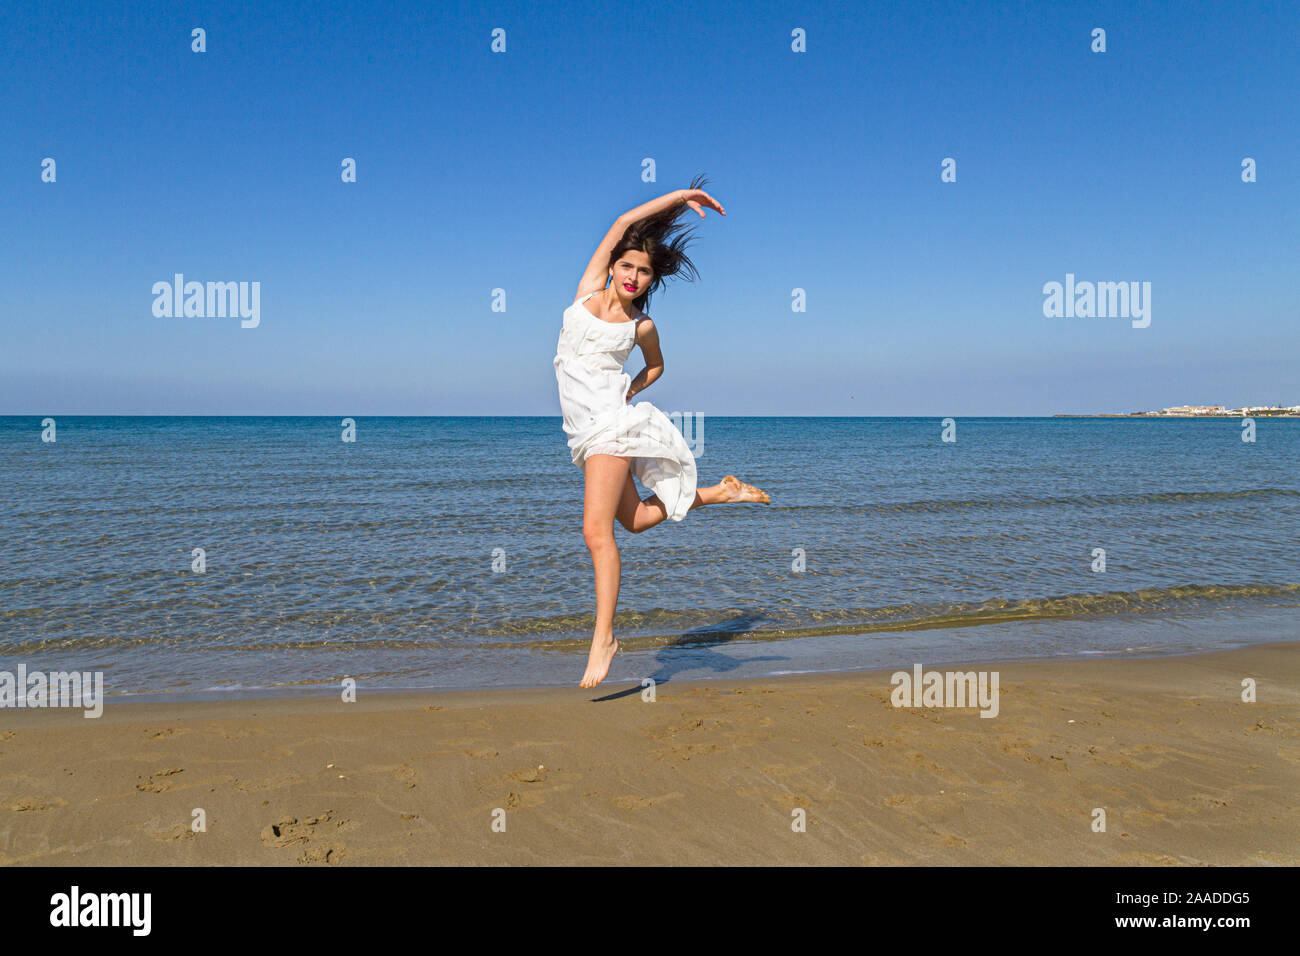 Young carefree beautiful girl in flimsy white dress. Fresh young beautiful joyful woman jumping on the beach in summer. Stock Photo